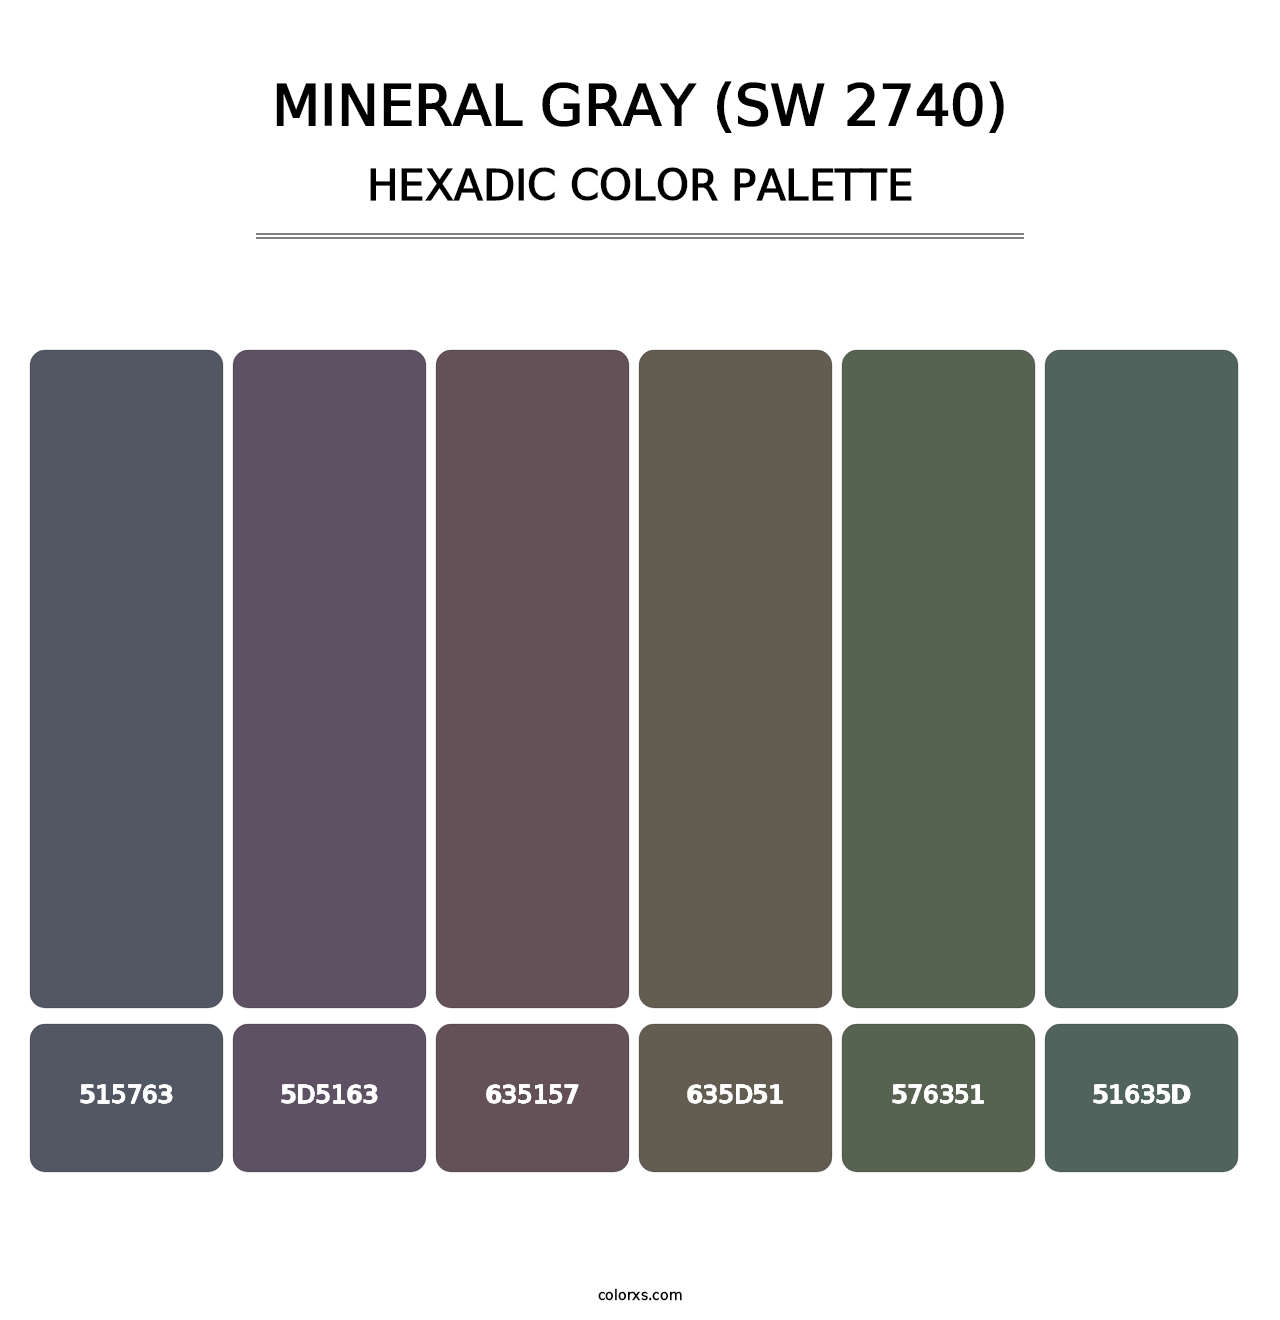 Mineral Gray (SW 2740) - Hexadic Color Palette